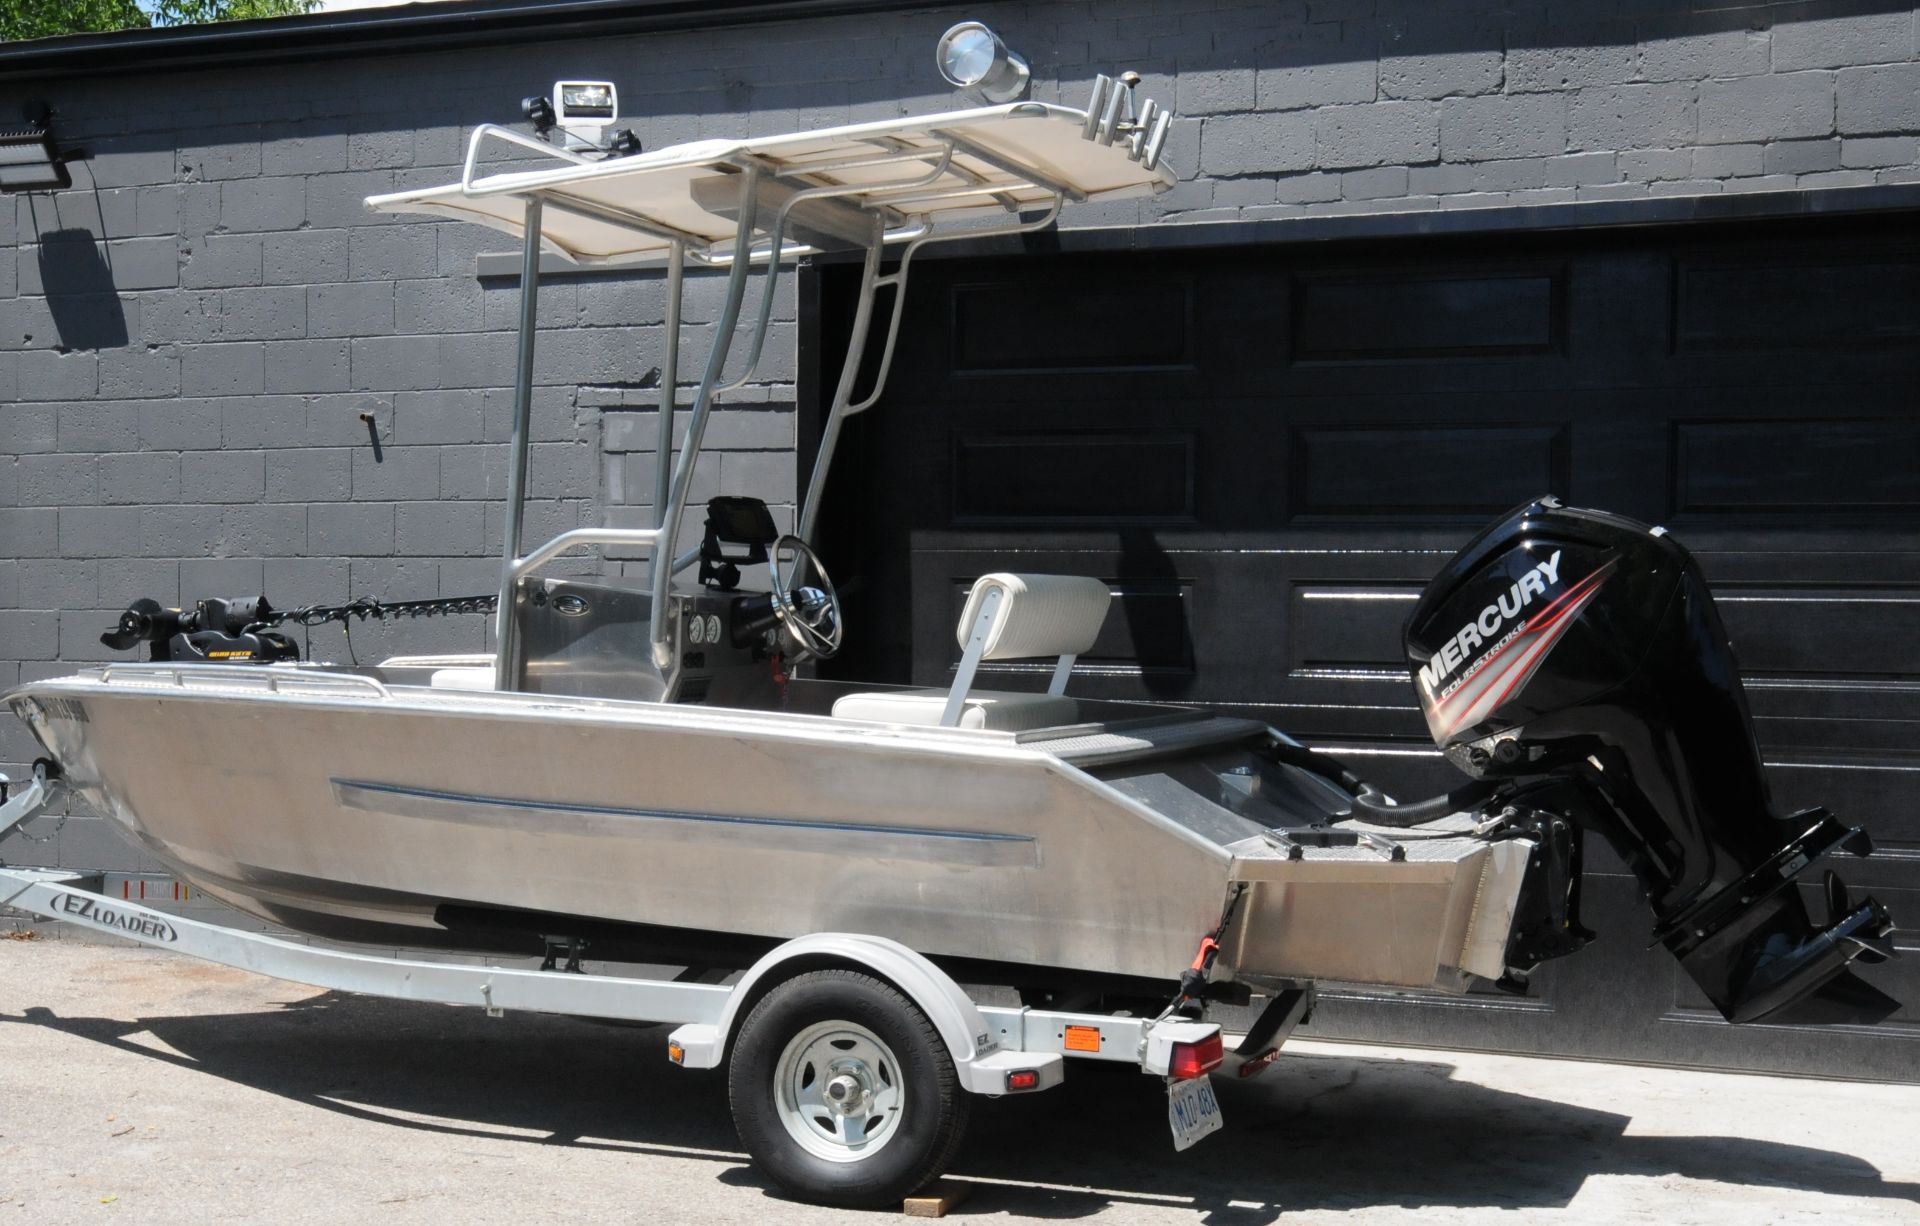 BAYVIEW BOATS (2013) PROFISHER 16 CENTER CONSOLE ALUMINUM FISHING BOAT ALL WELDED CONSTRUCTION - Image 2 of 21